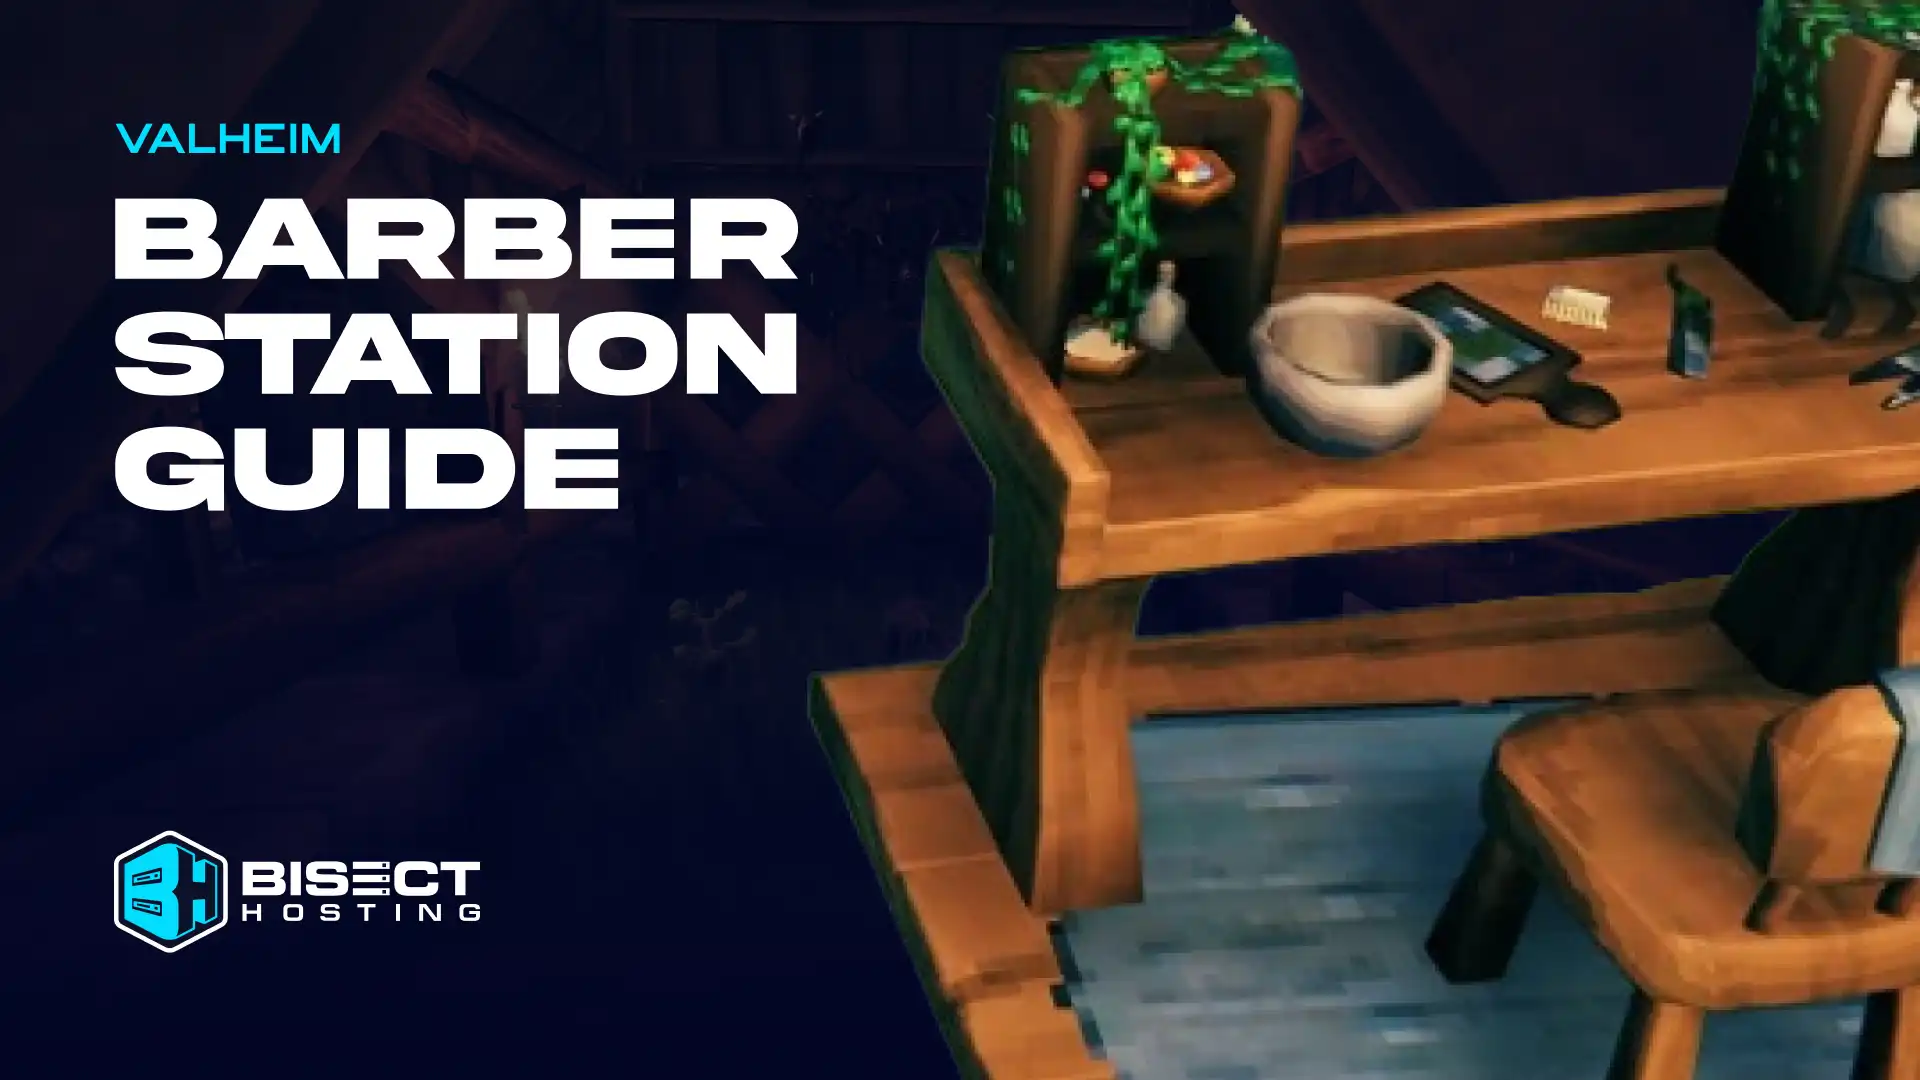 Valheim Barber Station Guide: How to Unlock, Hairstyles, & More